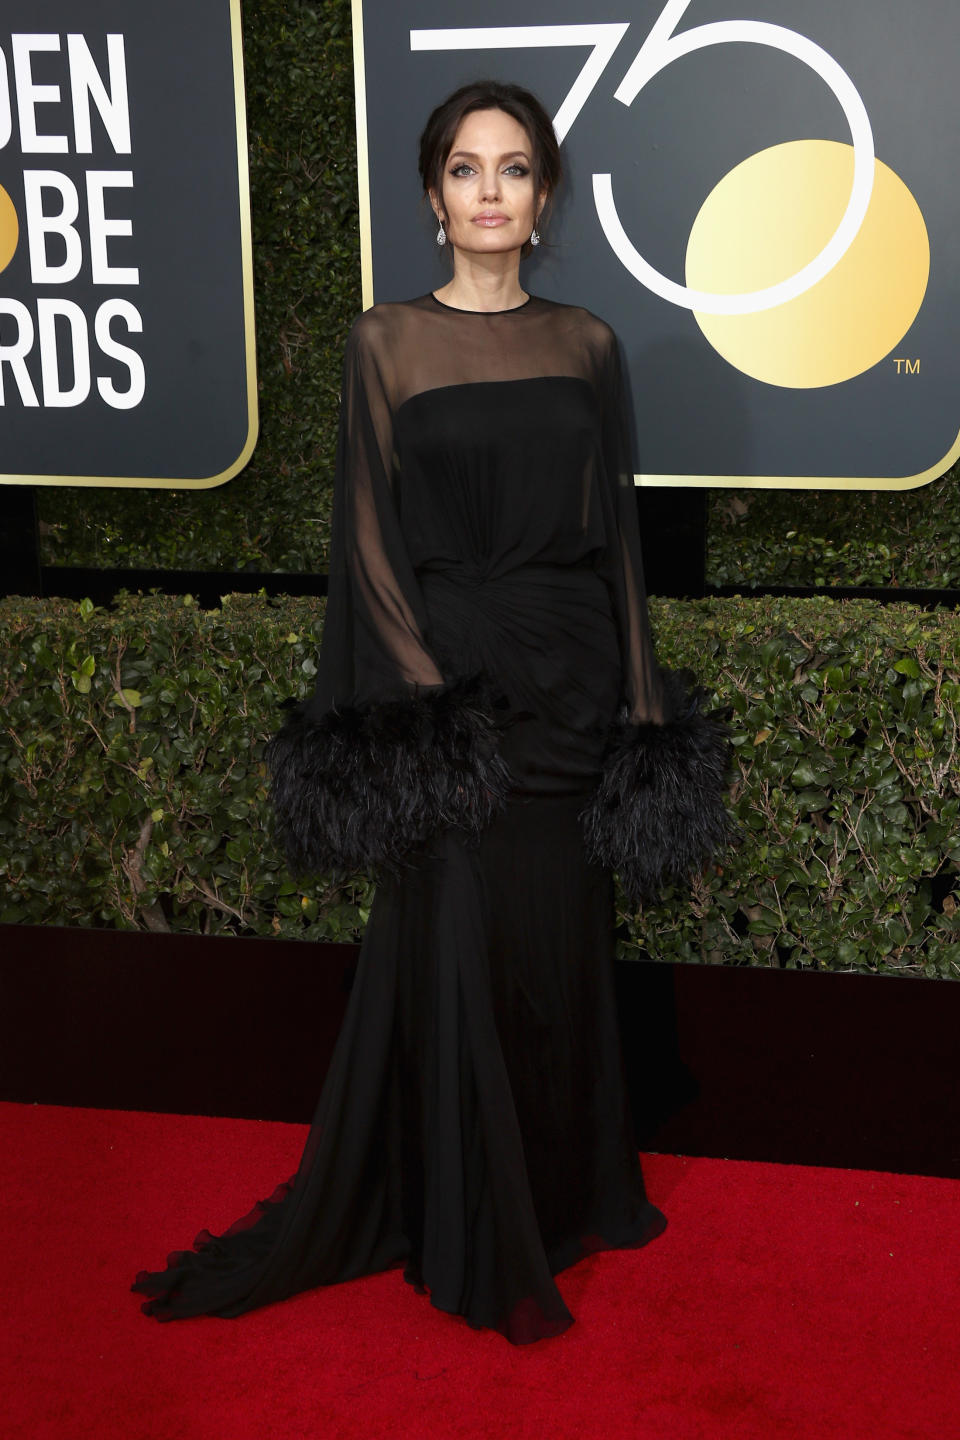 <p>For the 2018 Golden Globe Awards back in January, Angelina Jolie kick-started the year right in a sheer Atelier Versace gown and Barollo Italy shoes. A matching Stuart Weitzman clutch finished the ensemble. <em>[Photo: Getty]</em> </p>